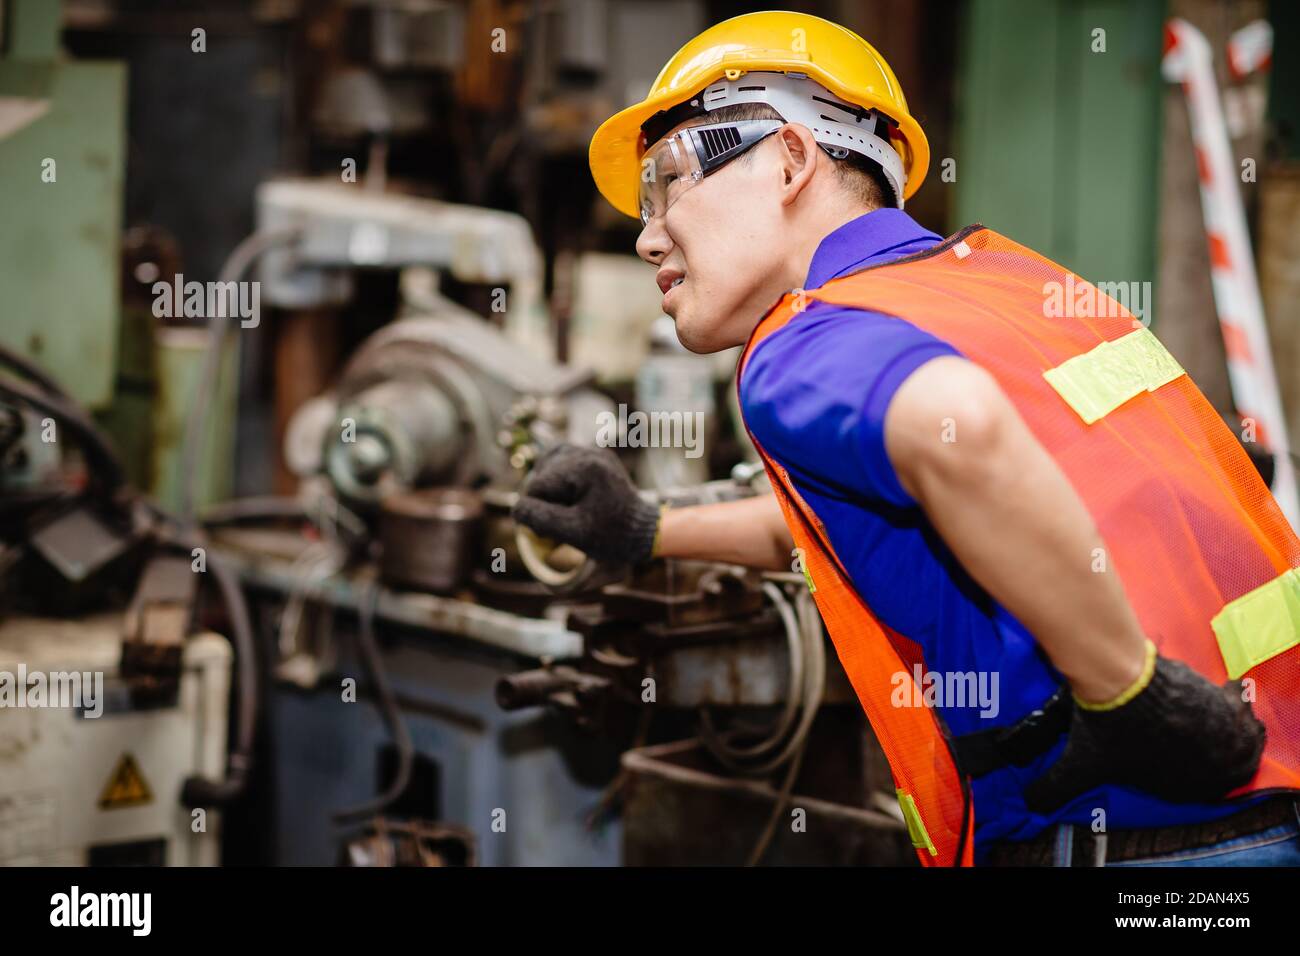 Asian worker working hard in industrial factories suffer from back waist pain while working on machines. Stock Photo